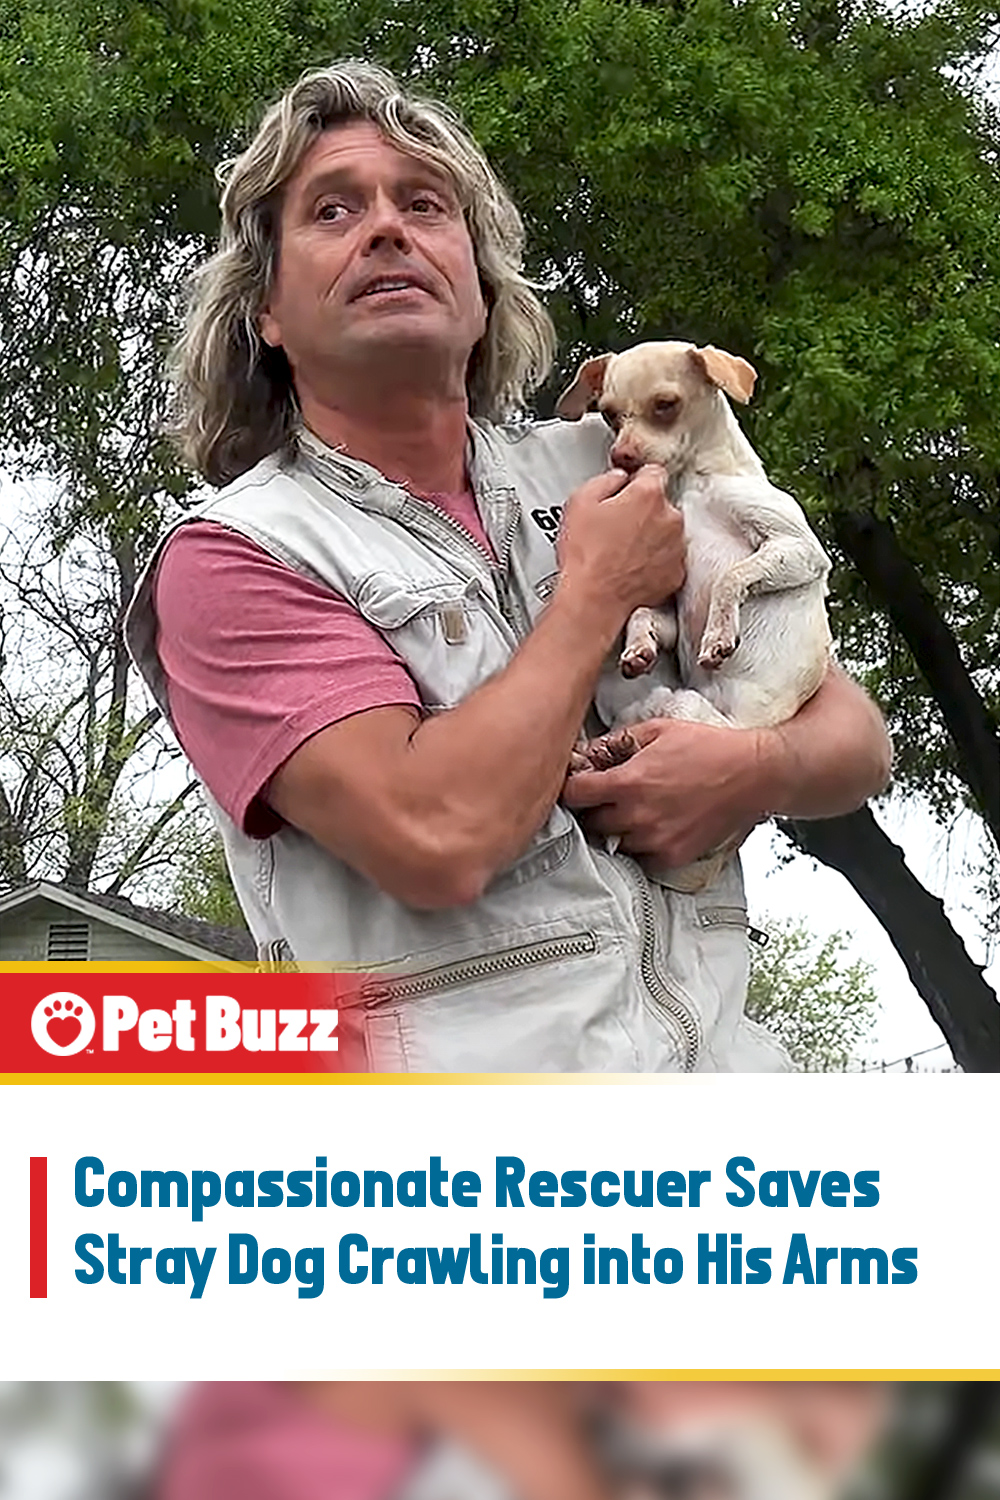 Compassionate Rescuer Saves Stray Dog Crawling into His Arms